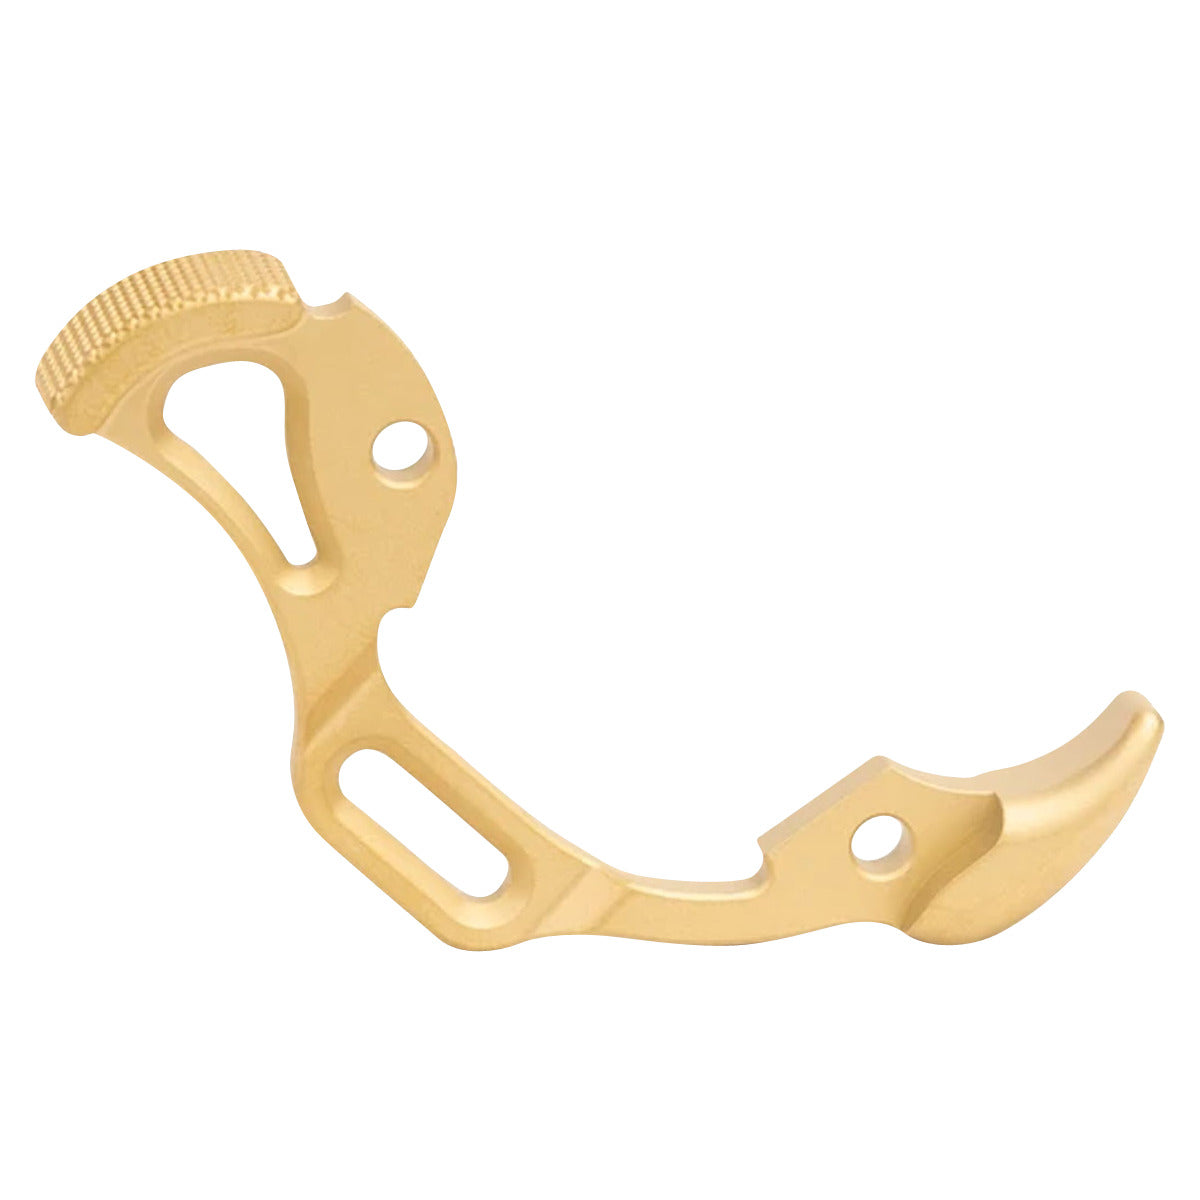 Ultraview Archery The Hinge - Hunting Bracket in  by GOHUNT | Ultraview - GOHUNT Shop